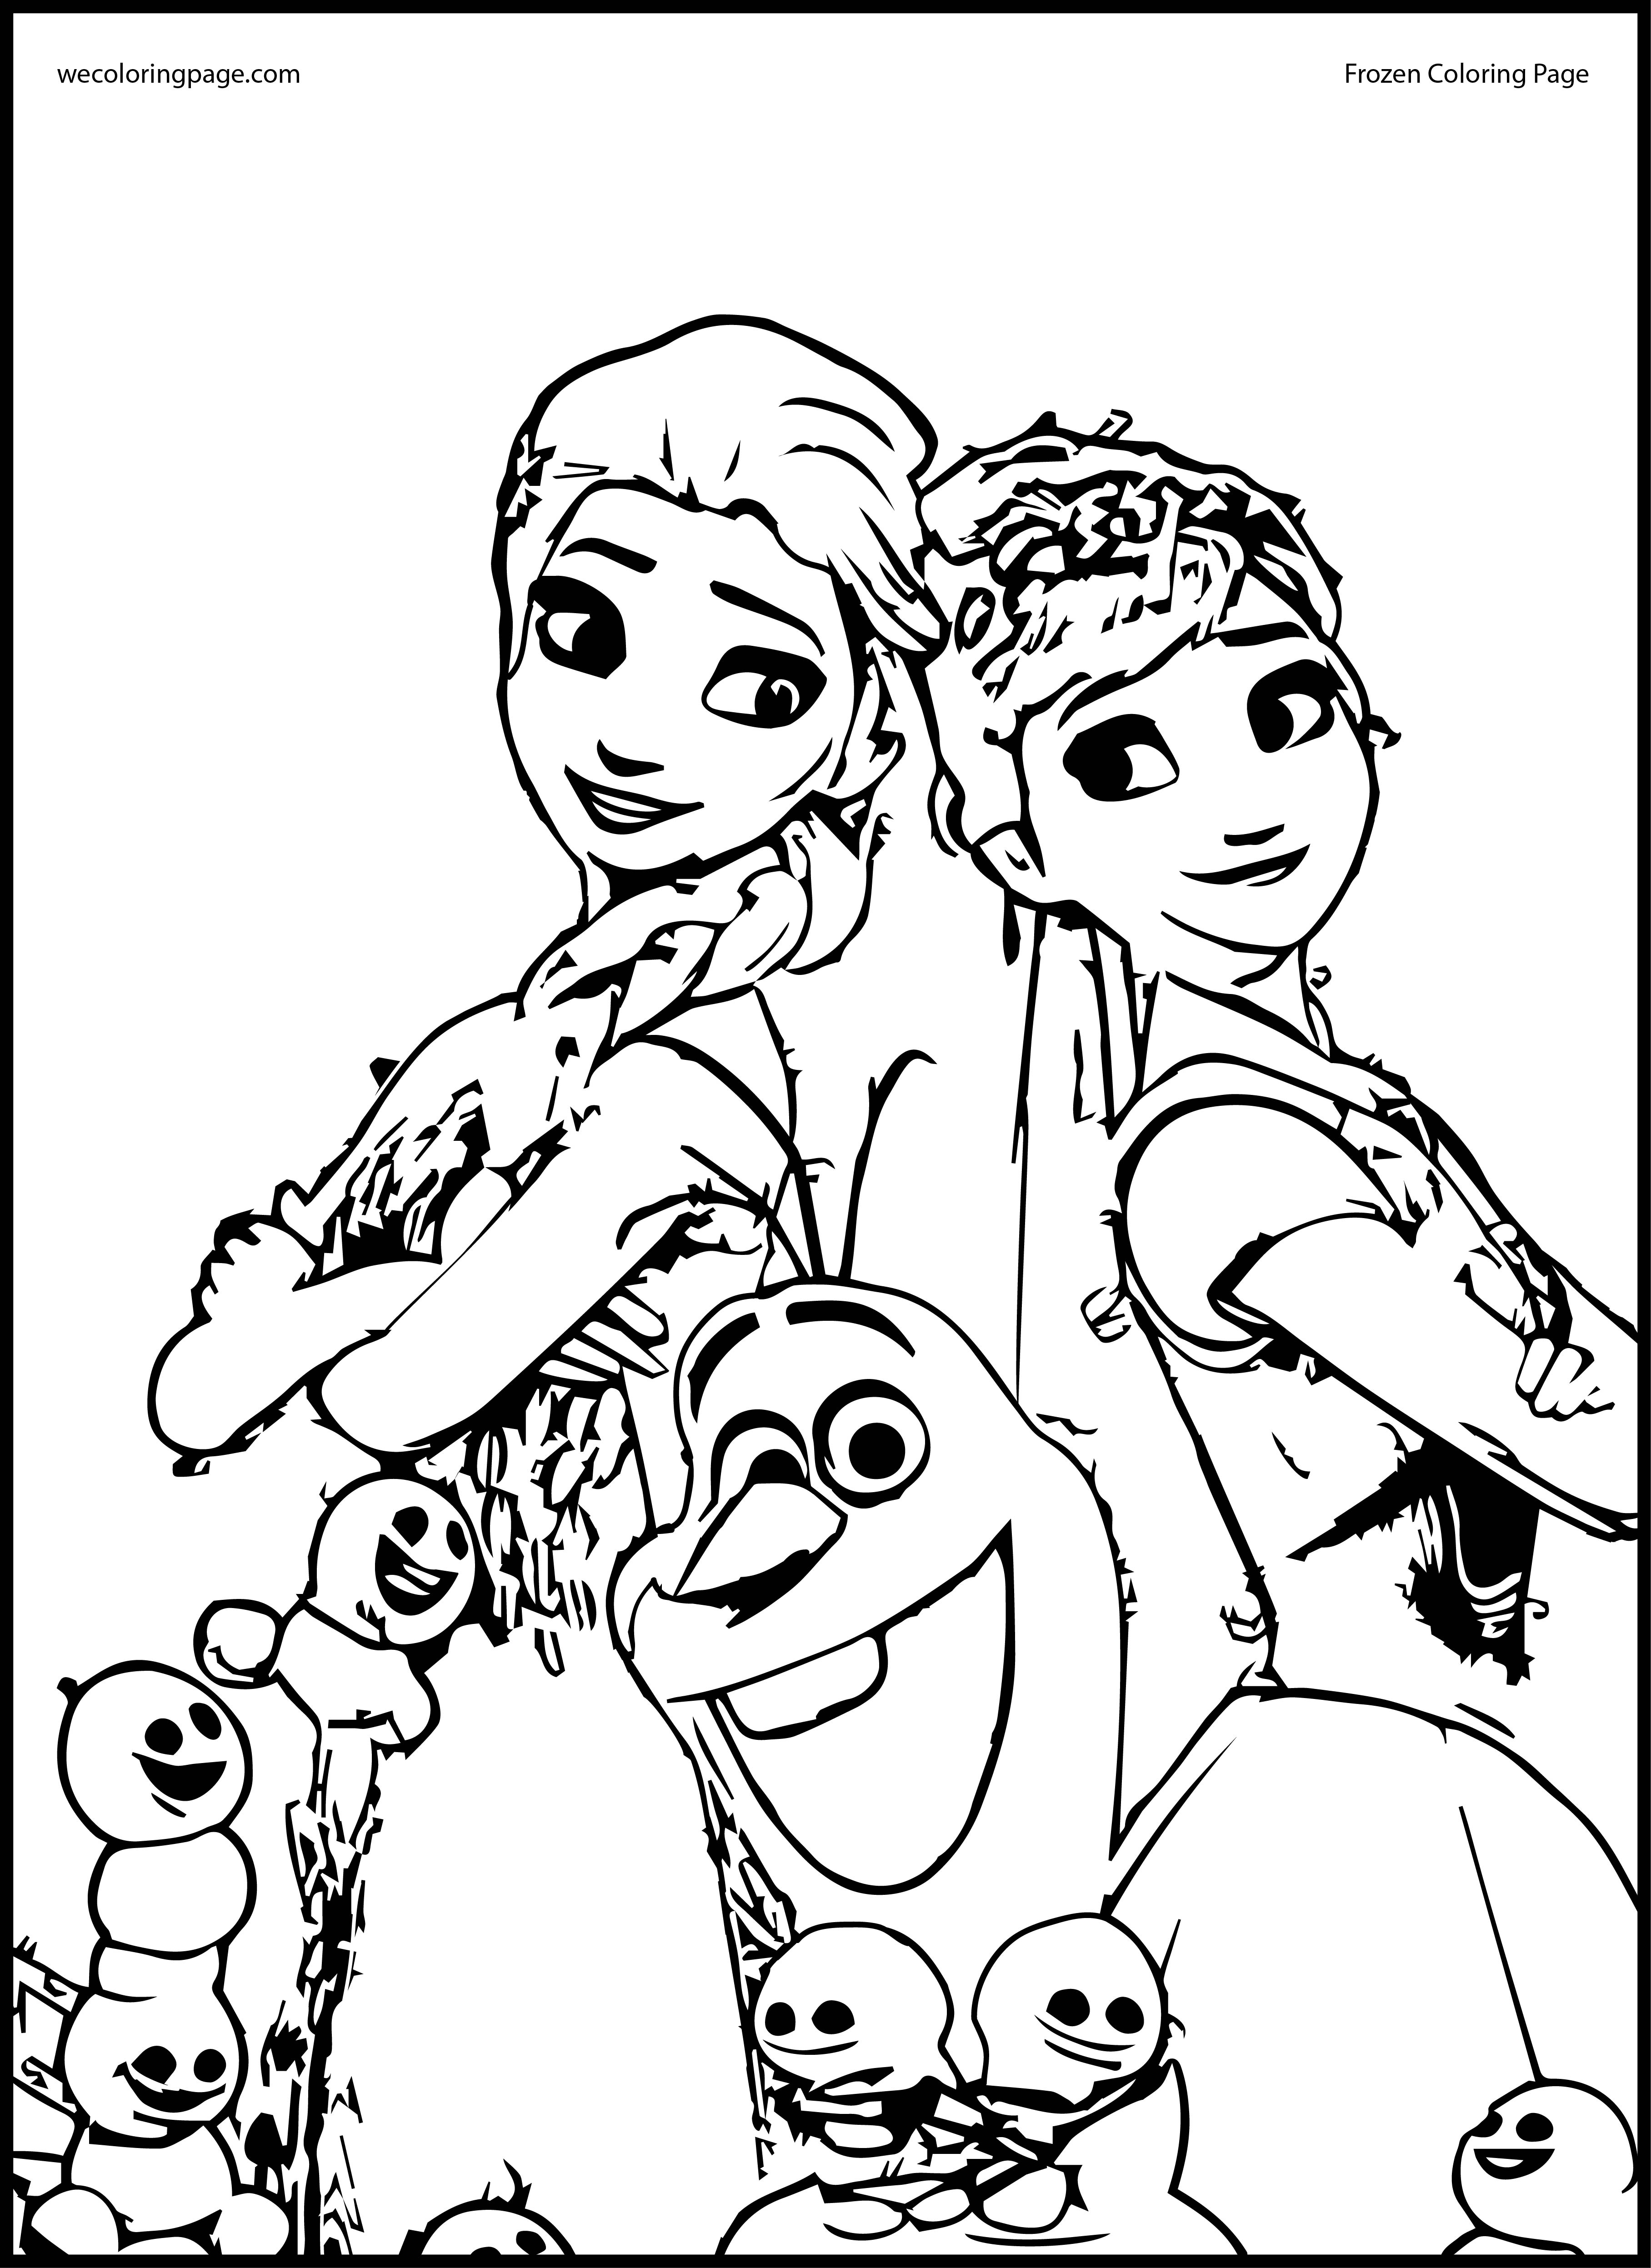 Kid Coloring Pages Frozen - Coloring